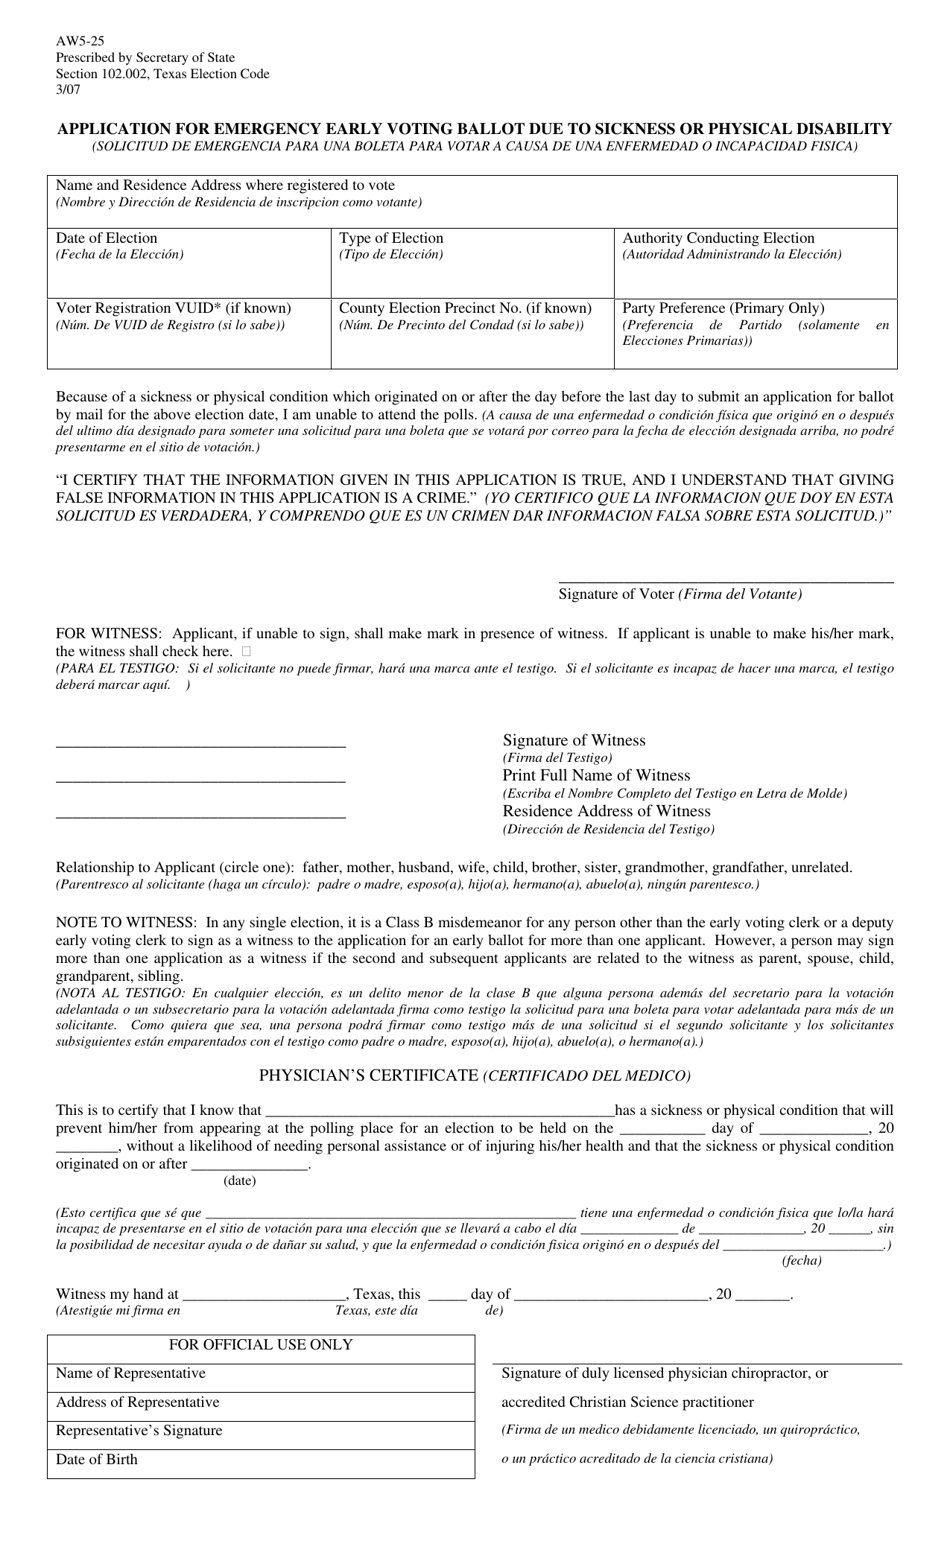 Form AW5-25 Application for Emergency Early Voting Ballot Due to Sickness or Physical Disability - Texas (English / Spanish), Page 1